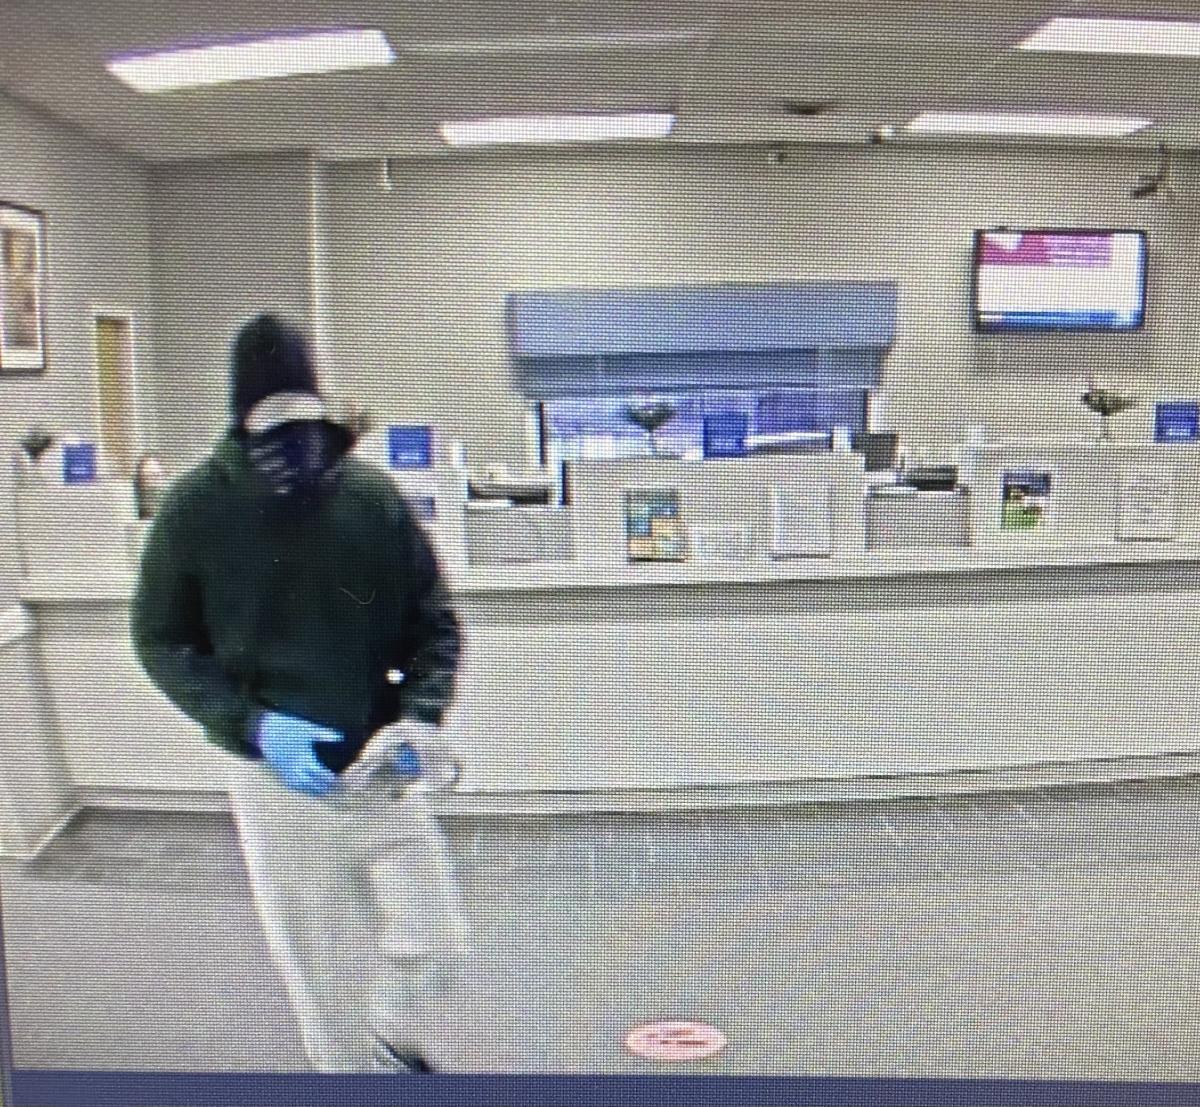 Bank Robbery Suspect